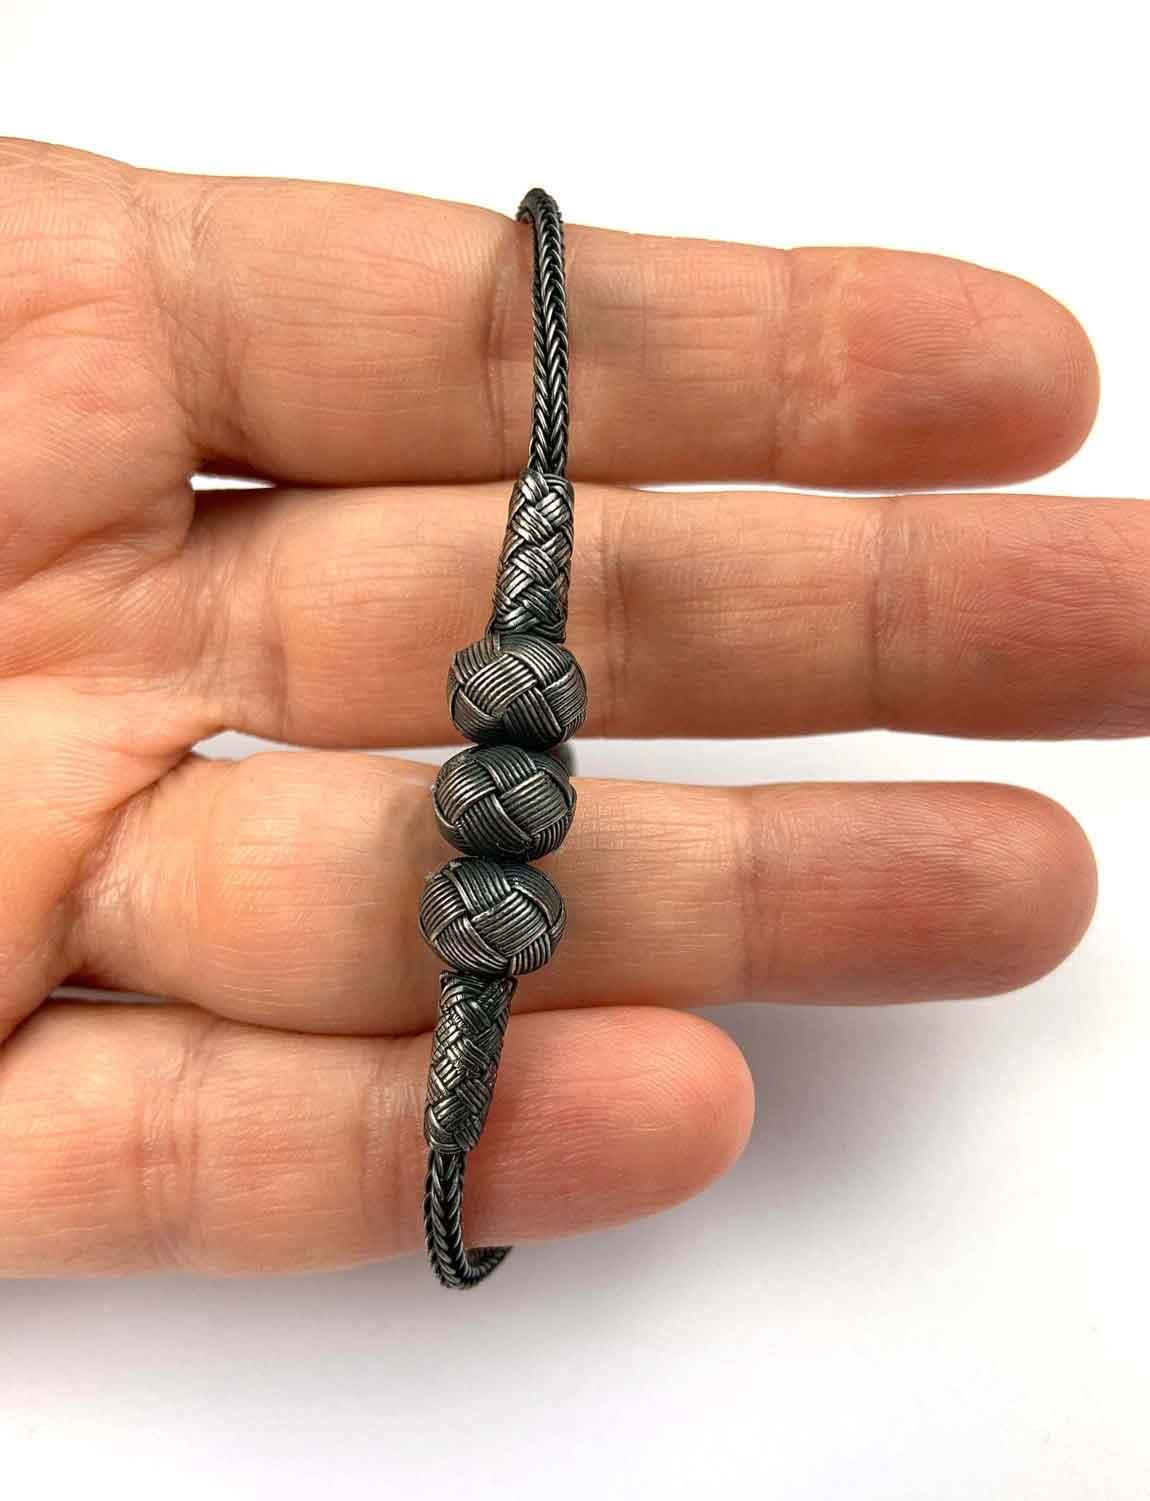 Luxurious LOVE BRAIDED BRACELET, Silver Handmade Bracelet, Unique Design Bracelet, Silver Mens Bracelet, Dainty Charming Bracelet for him available at Moyoni Design